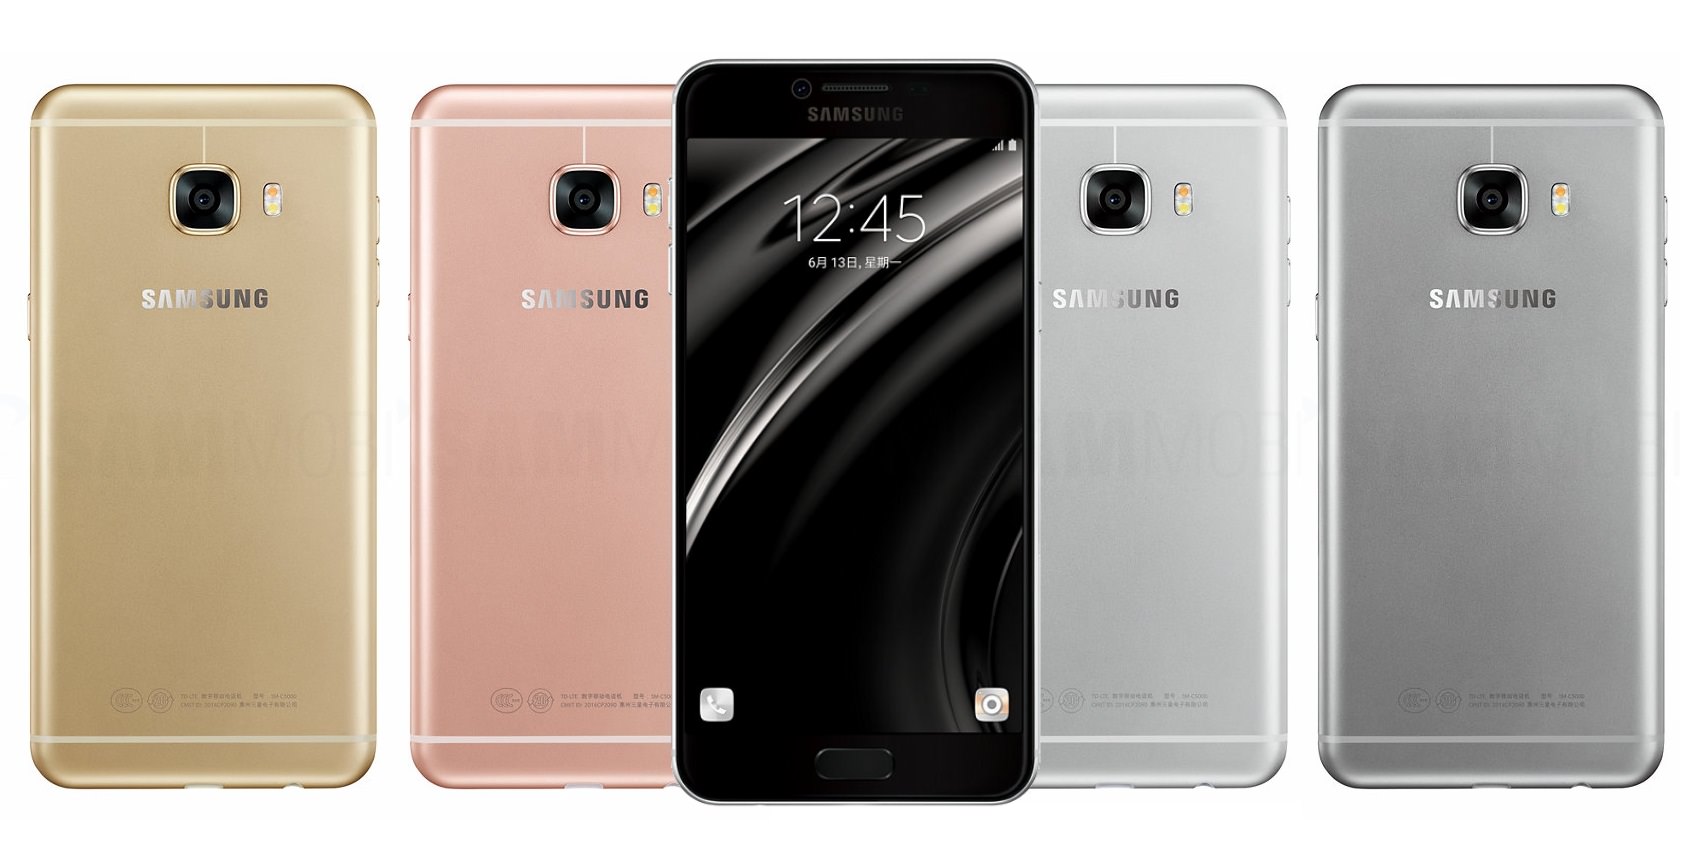 Samsung Galaxy C5 Fully Exposed Ahead of Official Release